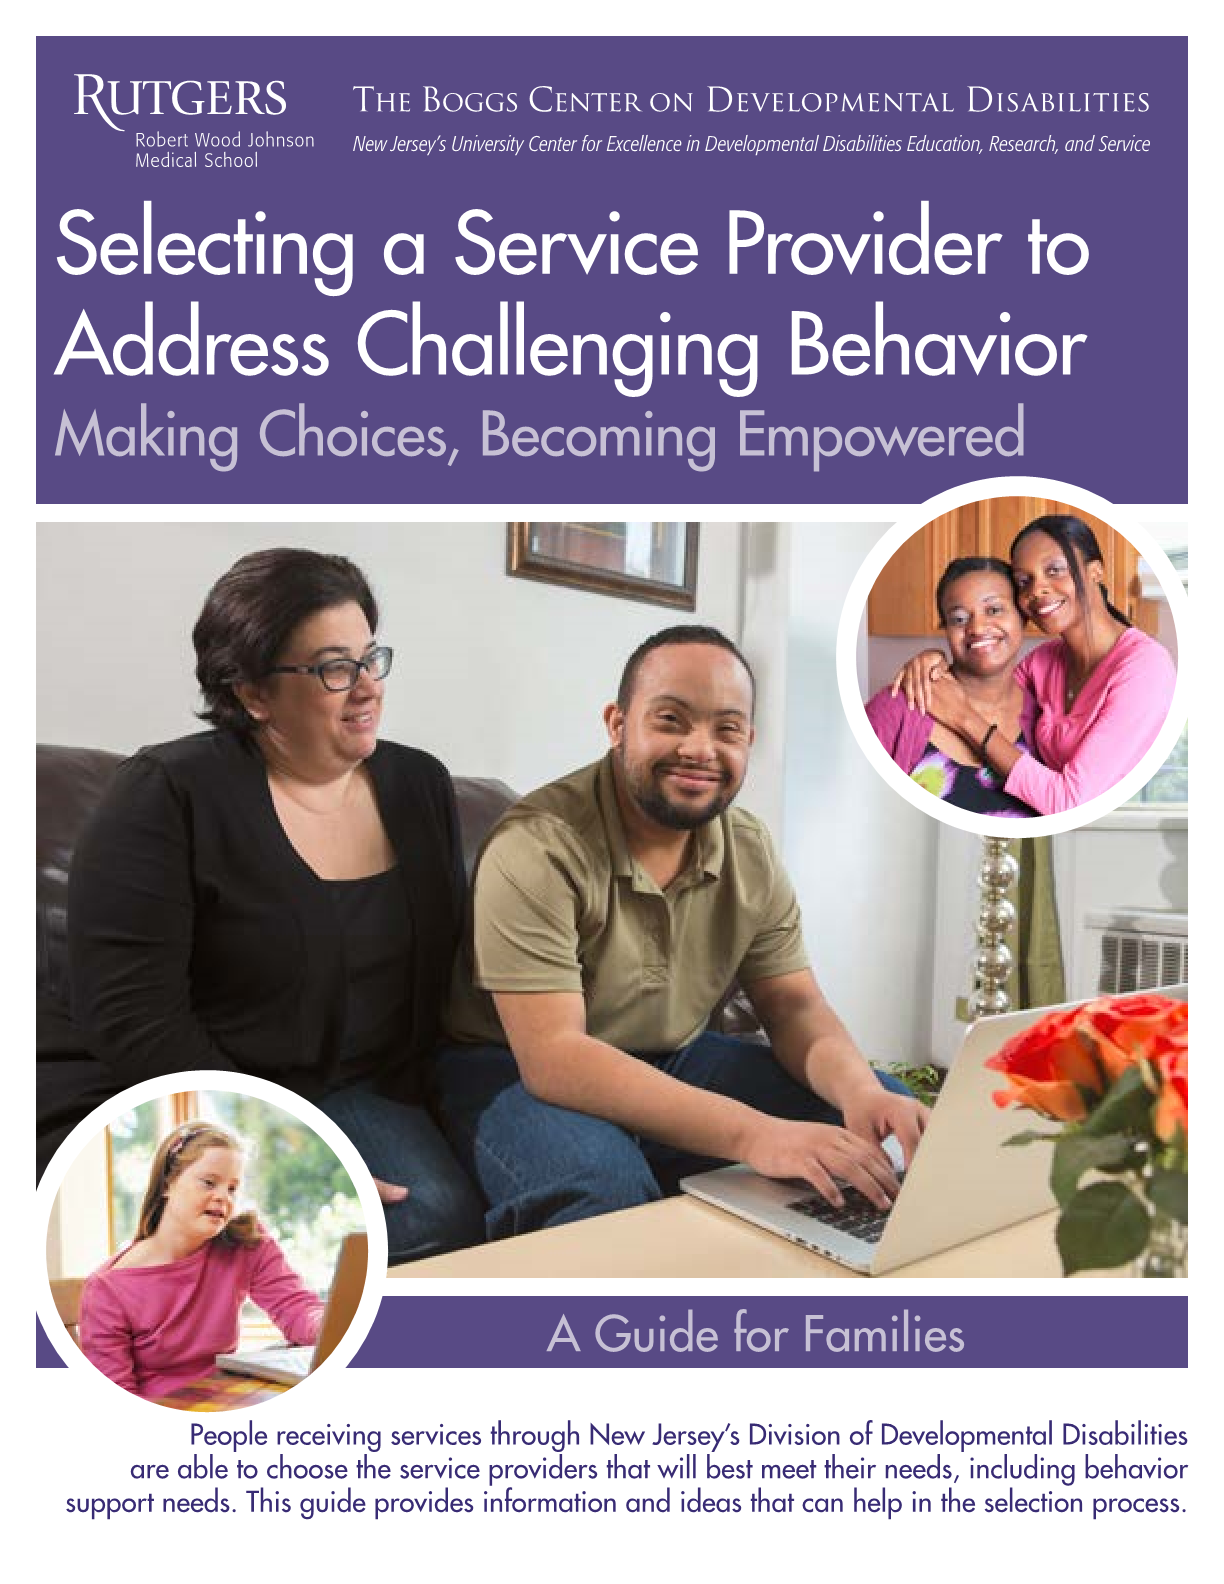 Selecting a Service Provider to Address Challenging Behavior:  Making Choices, Becoming Empowered